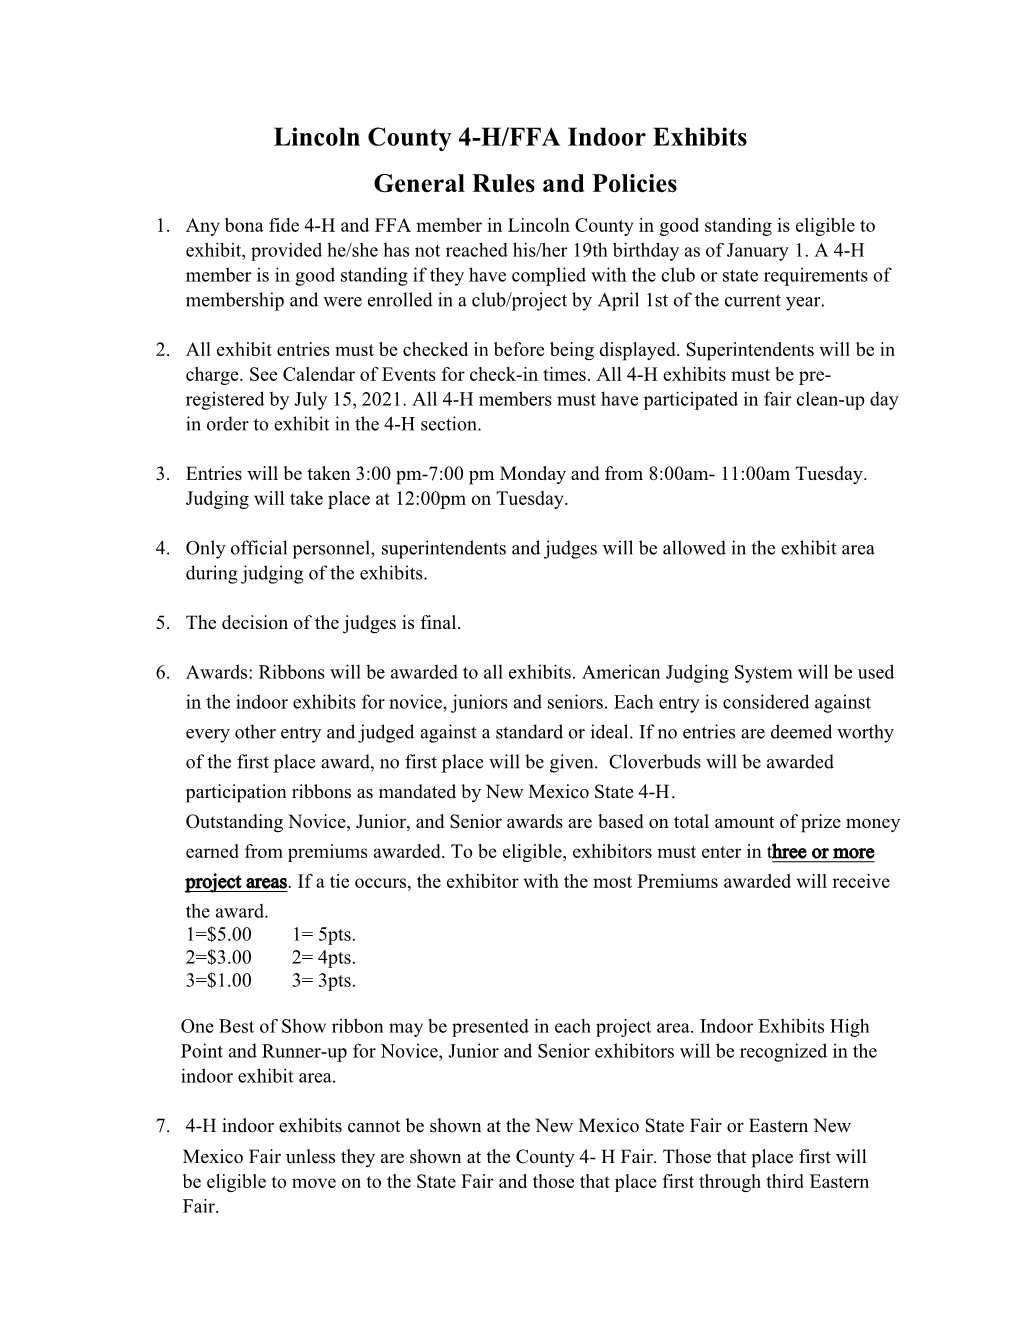 Lincoln County 4-H/FFA Indoor Exhibits General Rules and Policies